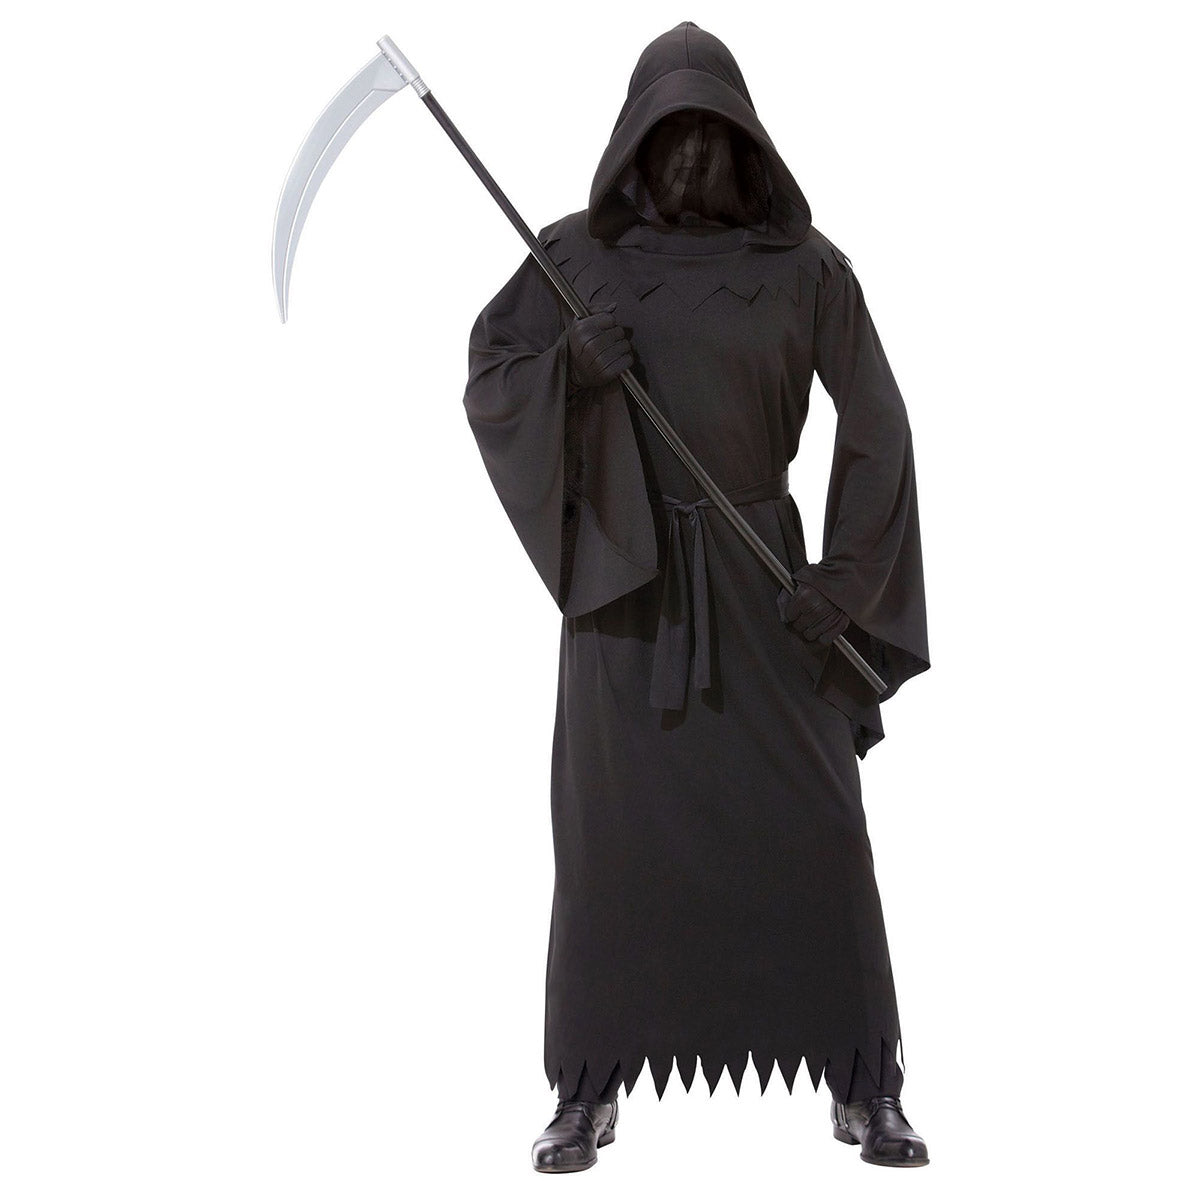 Phantom of Darkness Reaper Costume for Adults, Black Robe with Attached Mask